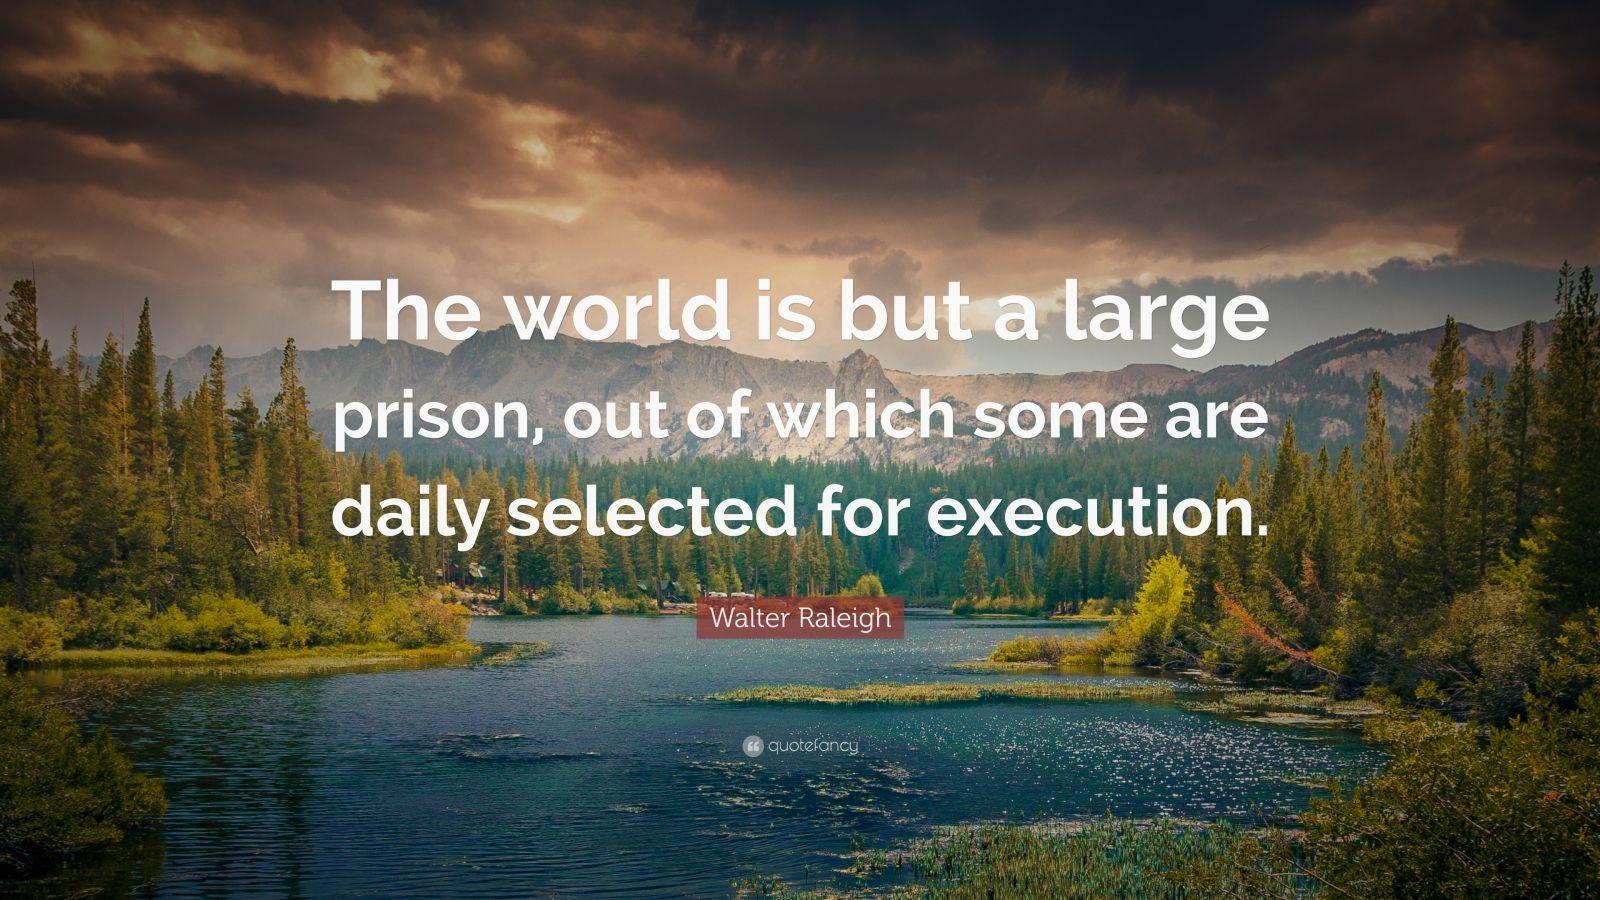 Walter Raleigh Quote: “The world is but a large prison, out of which